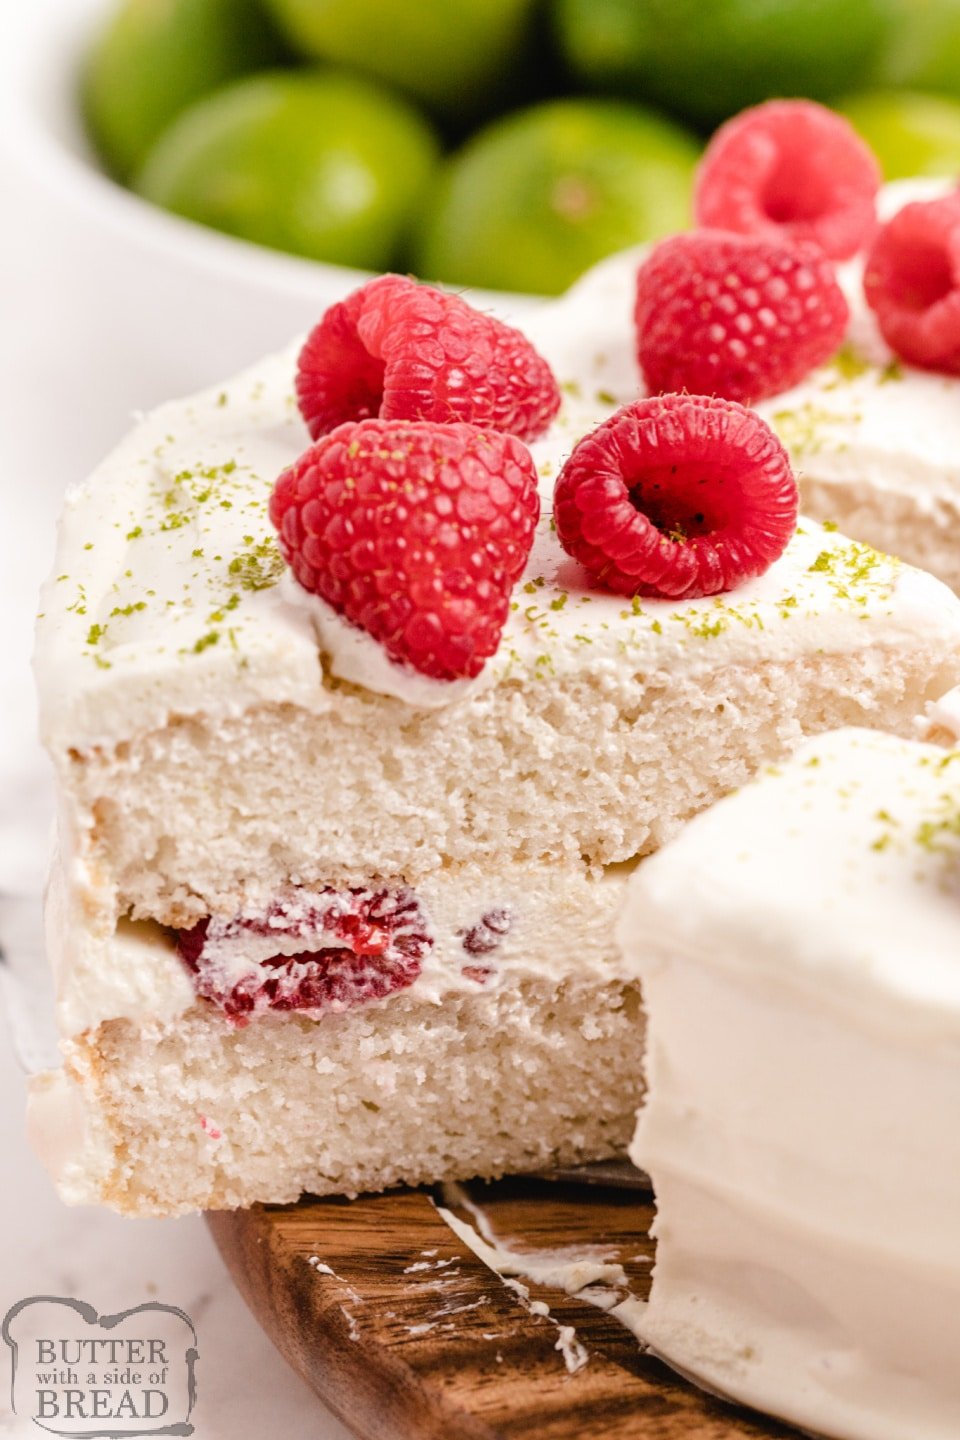 Key Lime Cake made with a cake mix and tons of lime flavor! Add fresh berries and a lime flavored whipped cream for a light, refreshing dessert that looks much fancier than it is!